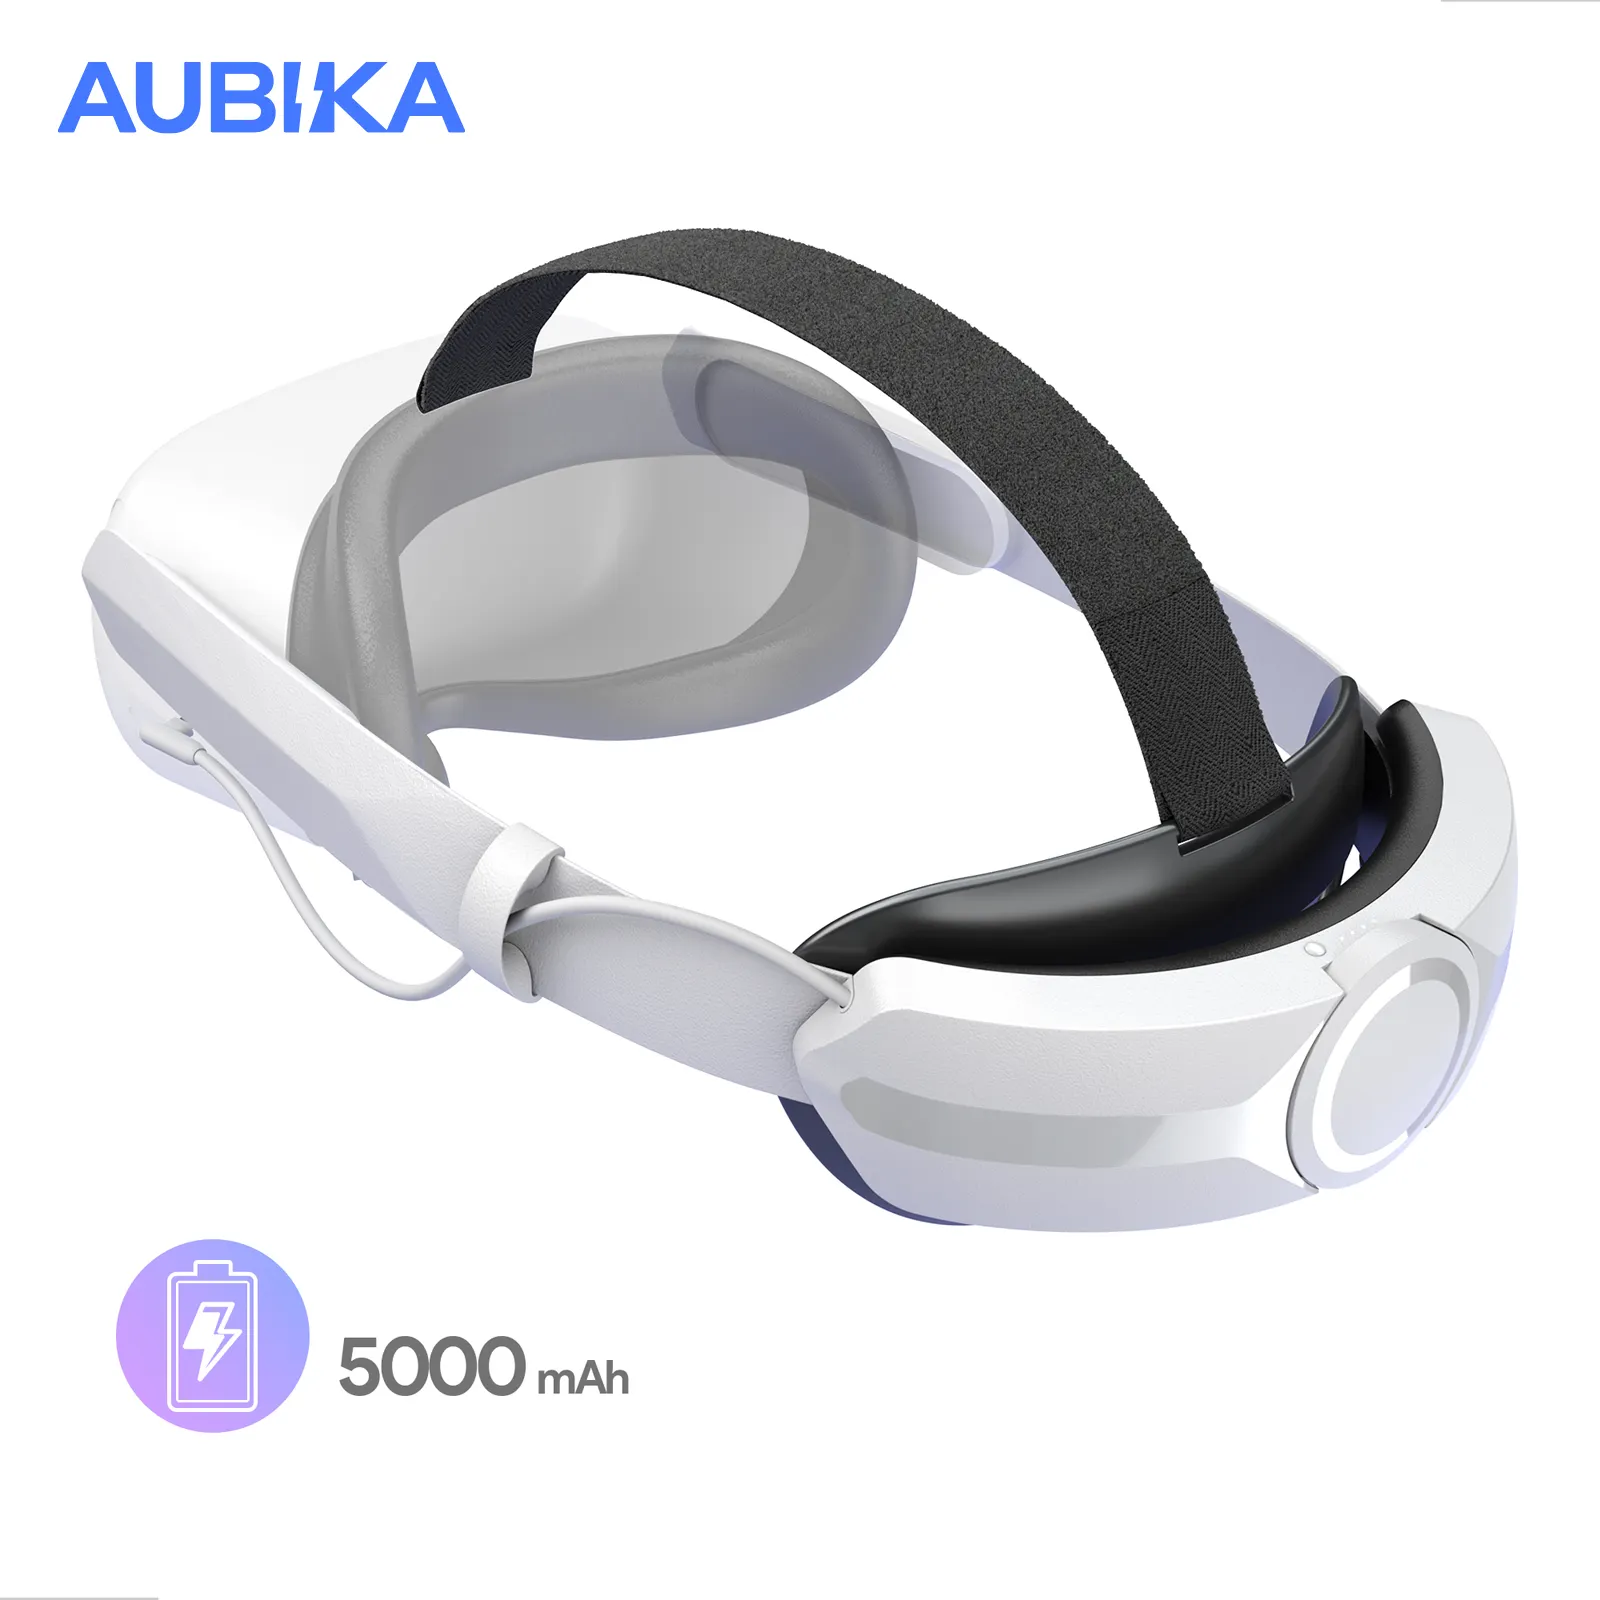 AUBIKA design Comfort Head Strap with Battery for Meta/Oculus Quest 2, Elite Strap with 5000mAh Battery Pack